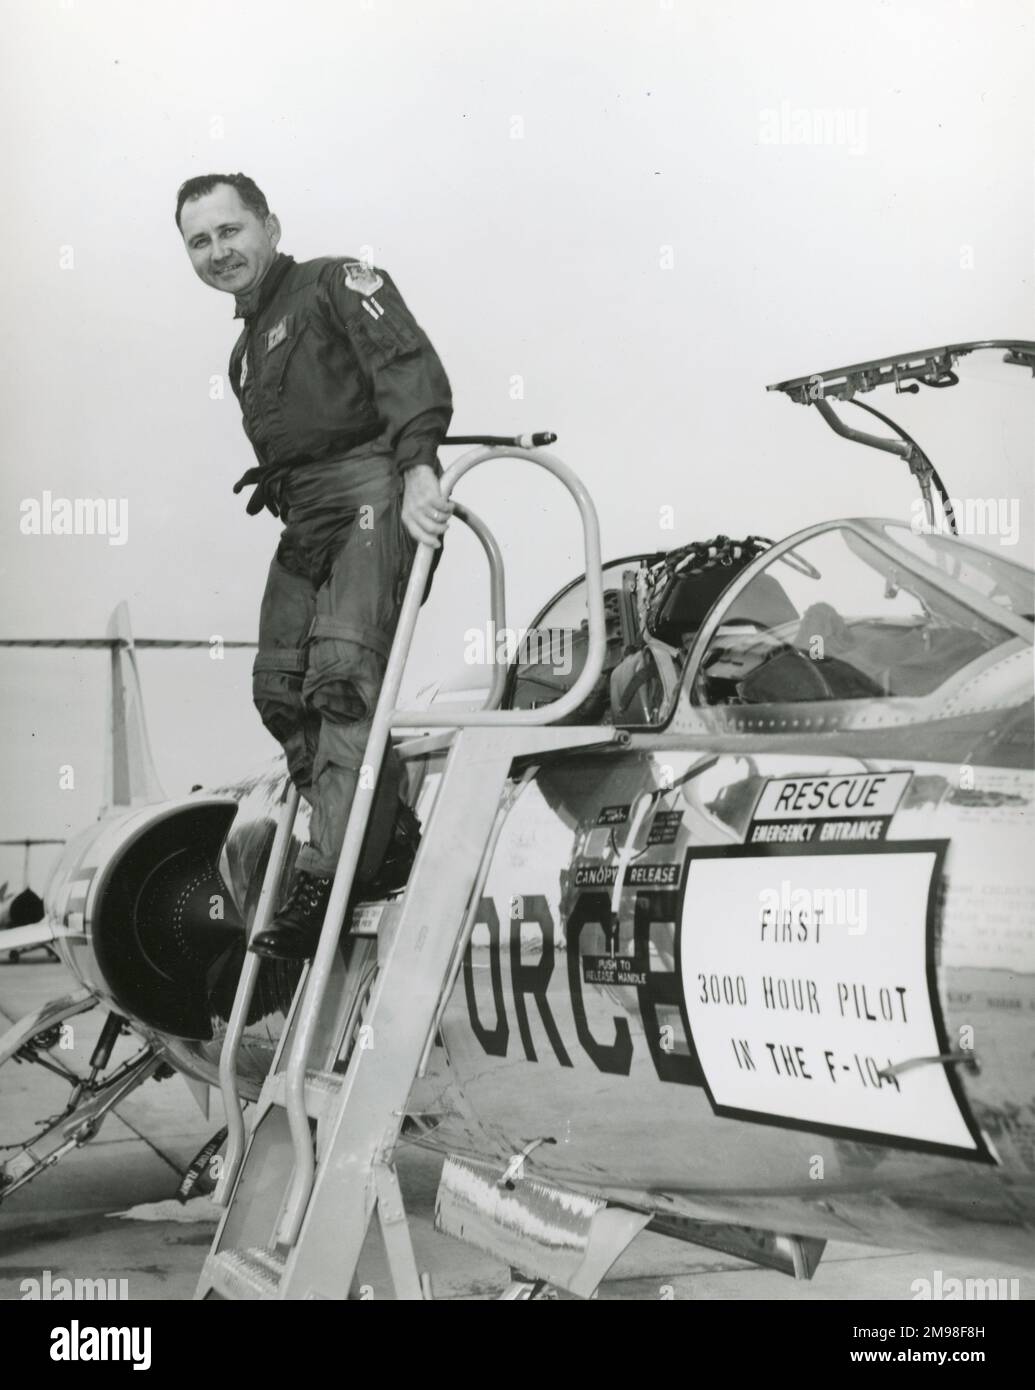 Col Joseph R Nevers, the first person to complete 3,000 flight hours in the Lockheed F-104 Starfighter. Stock Photo